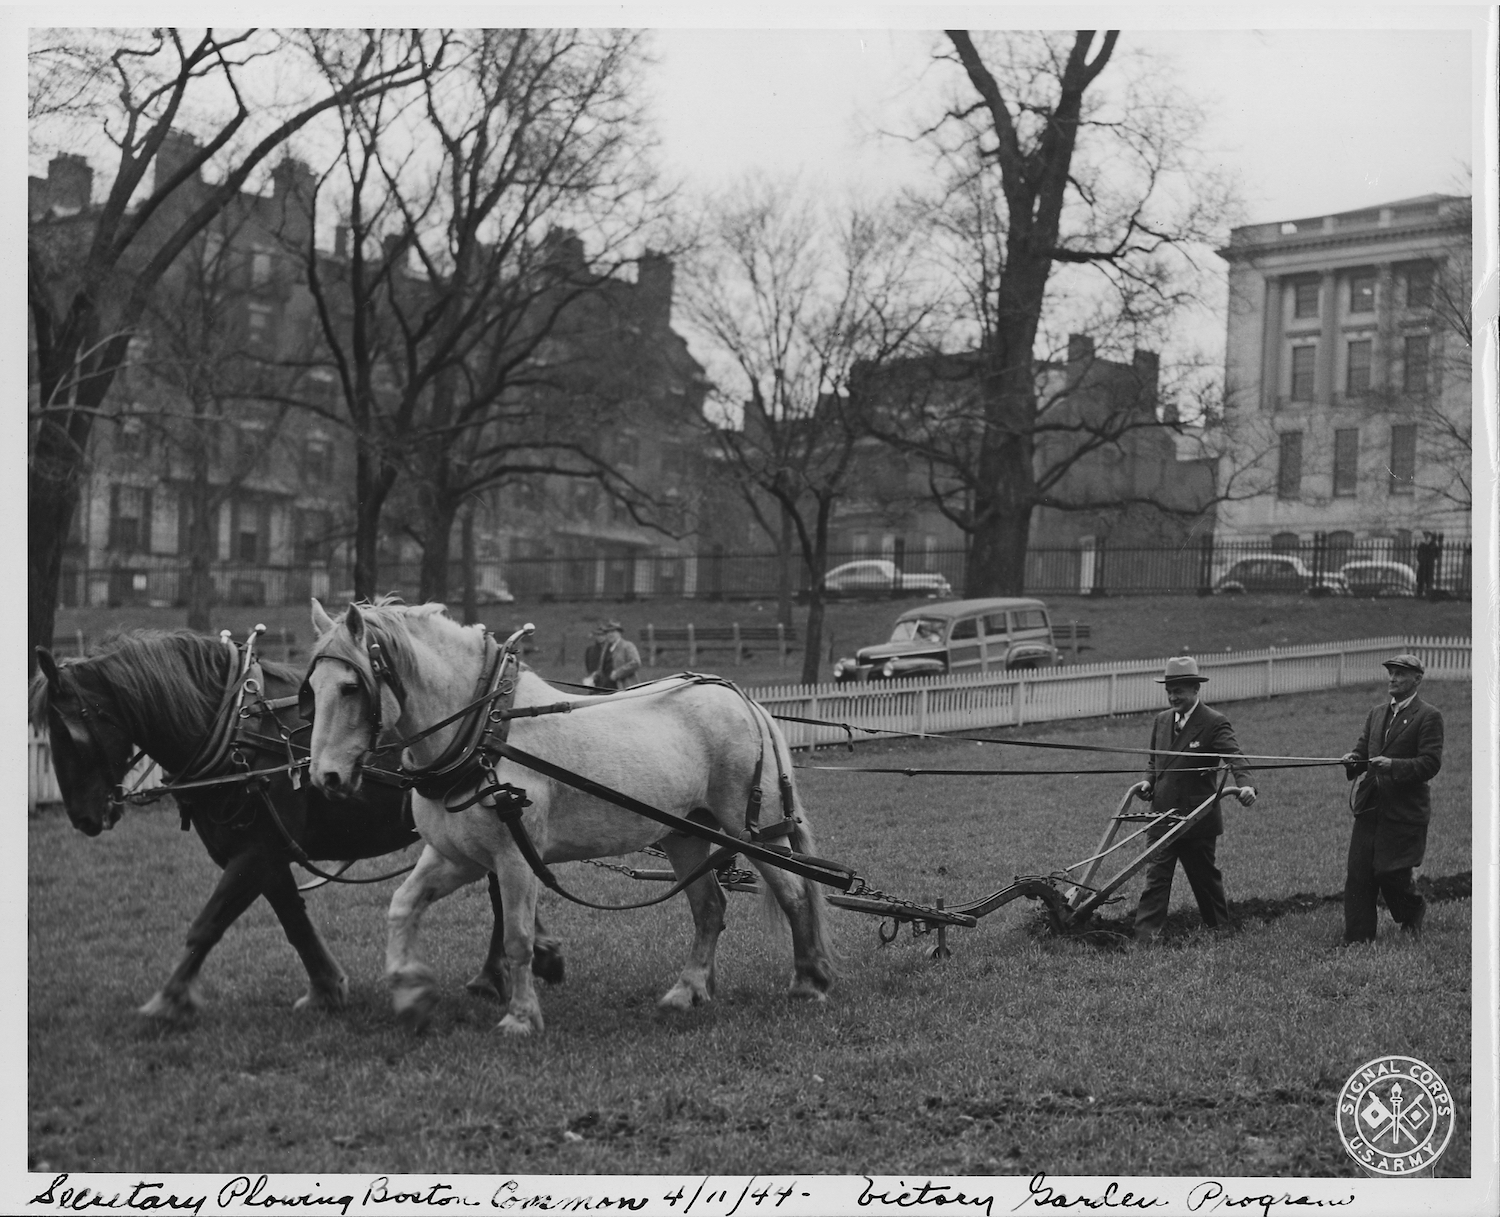 Agriculture Secretary Wickard plowing Boston Common to promote the National Victory Garden program (April 11, 1944) – photo courtesy of U.S. National Archives and Records Administration, Public Domain